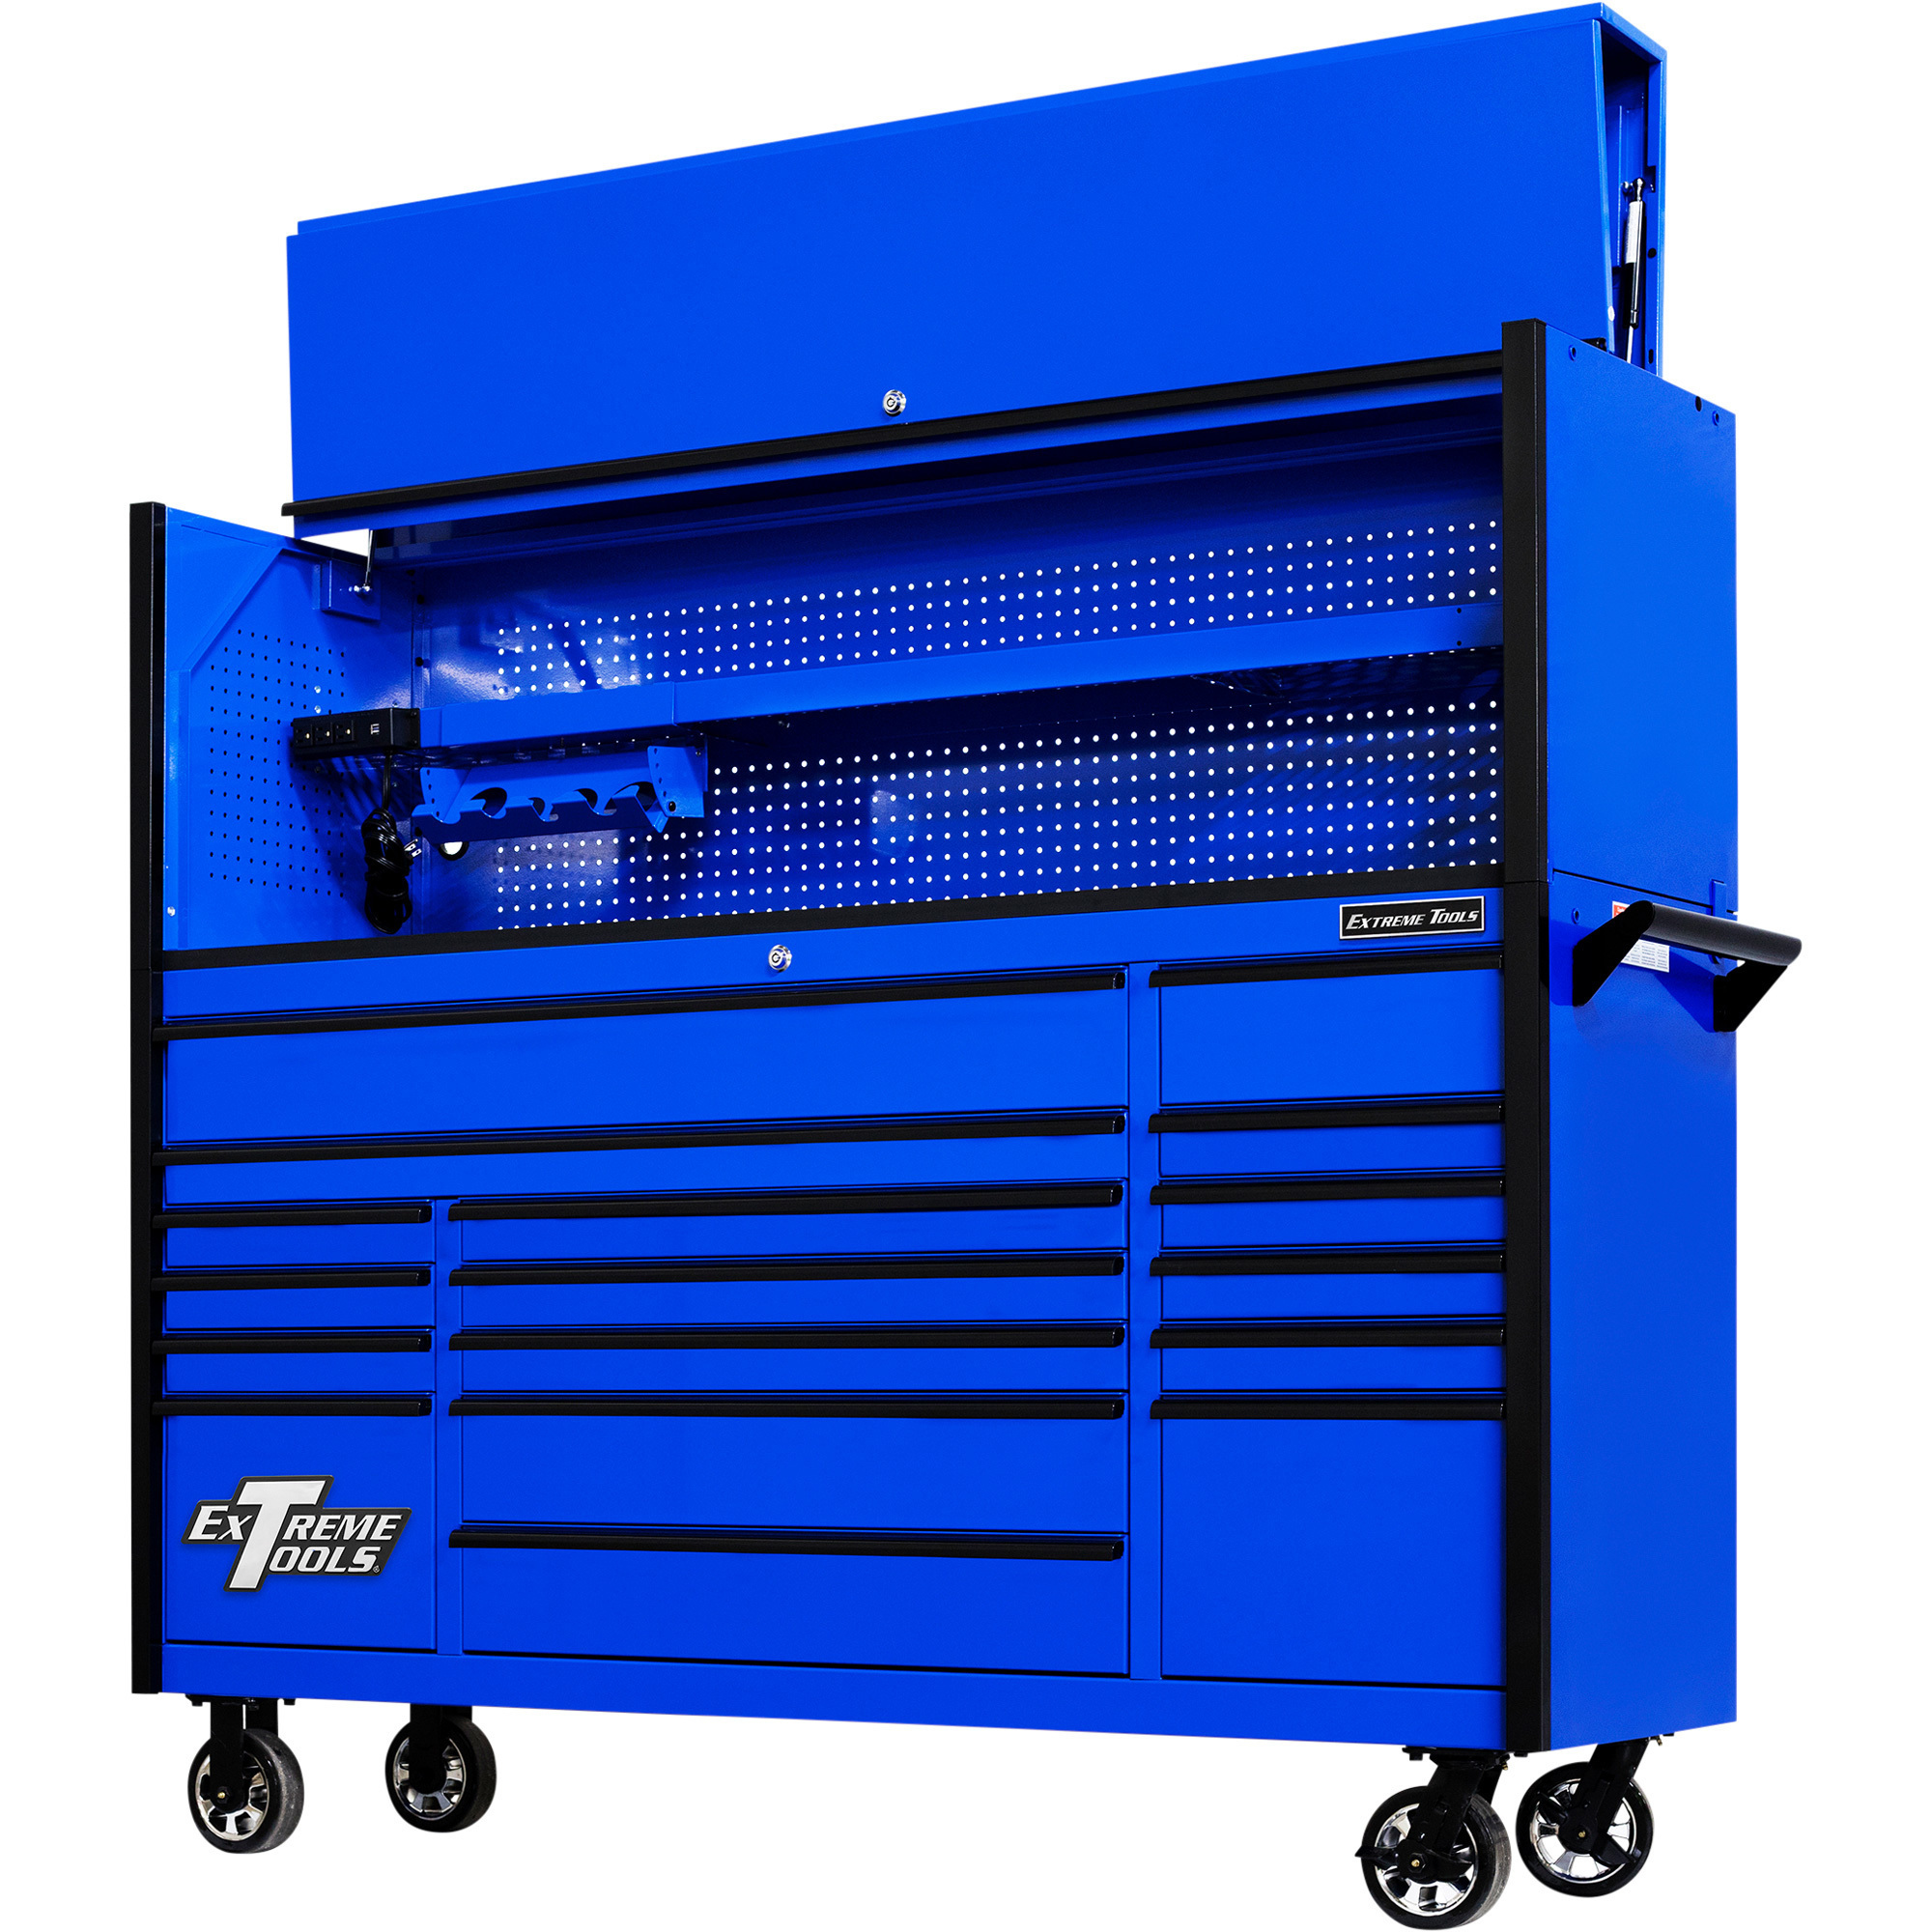 Extreme Tools Extreme Power Workstation Hutch and 17-Drawer Roller Cabinet Combo, Blue/Black, Model DX7218HRUK